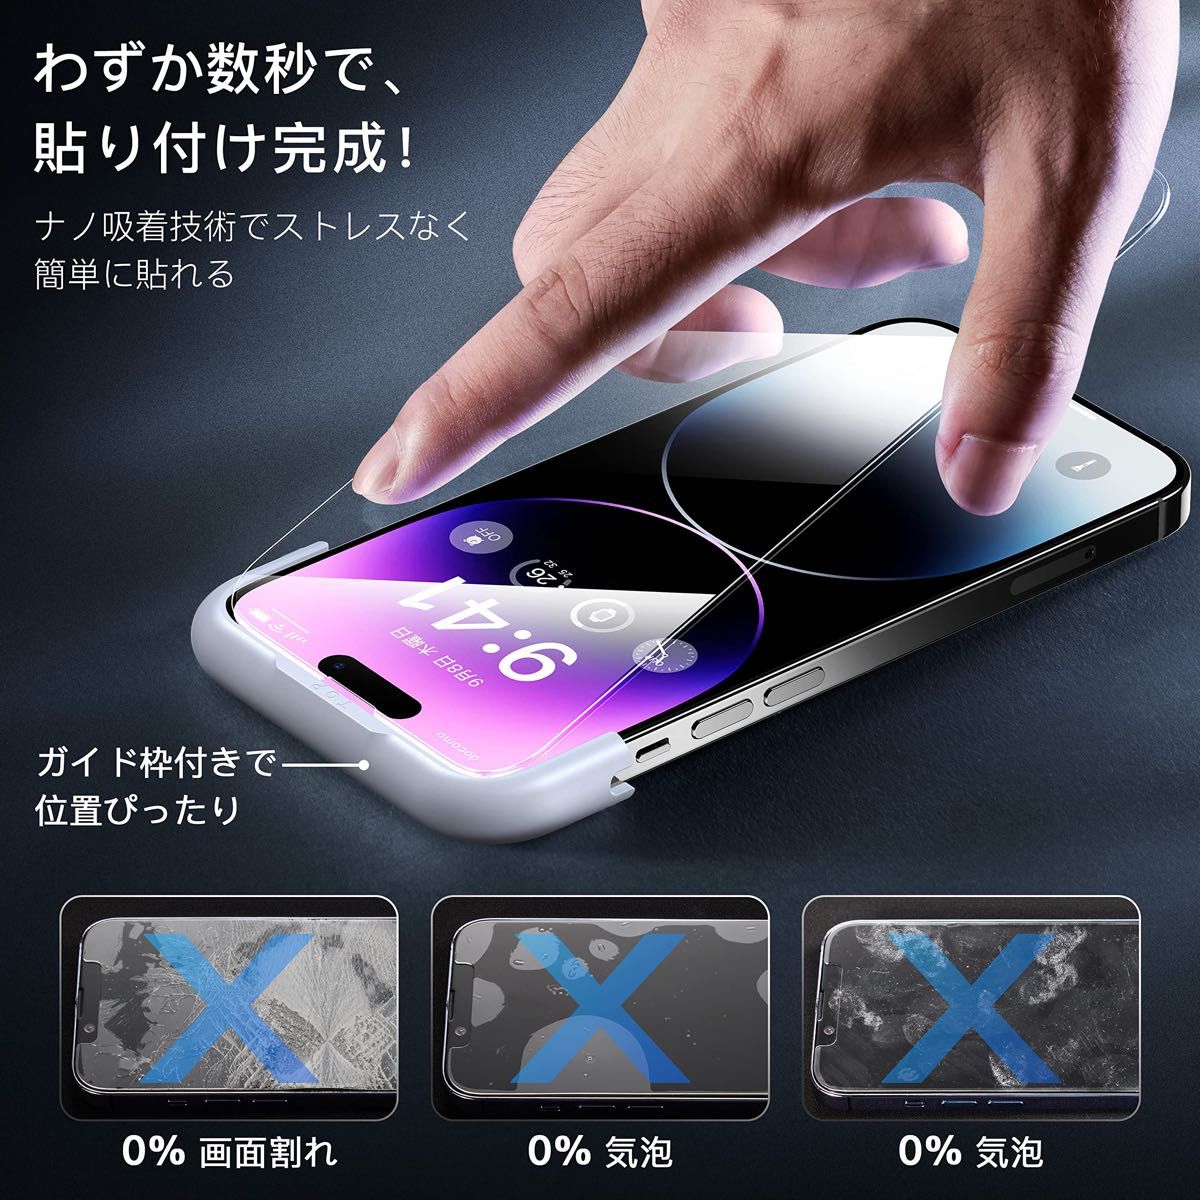 iPhone 14 pro max 用 フィルム付きケース 全面保護セット